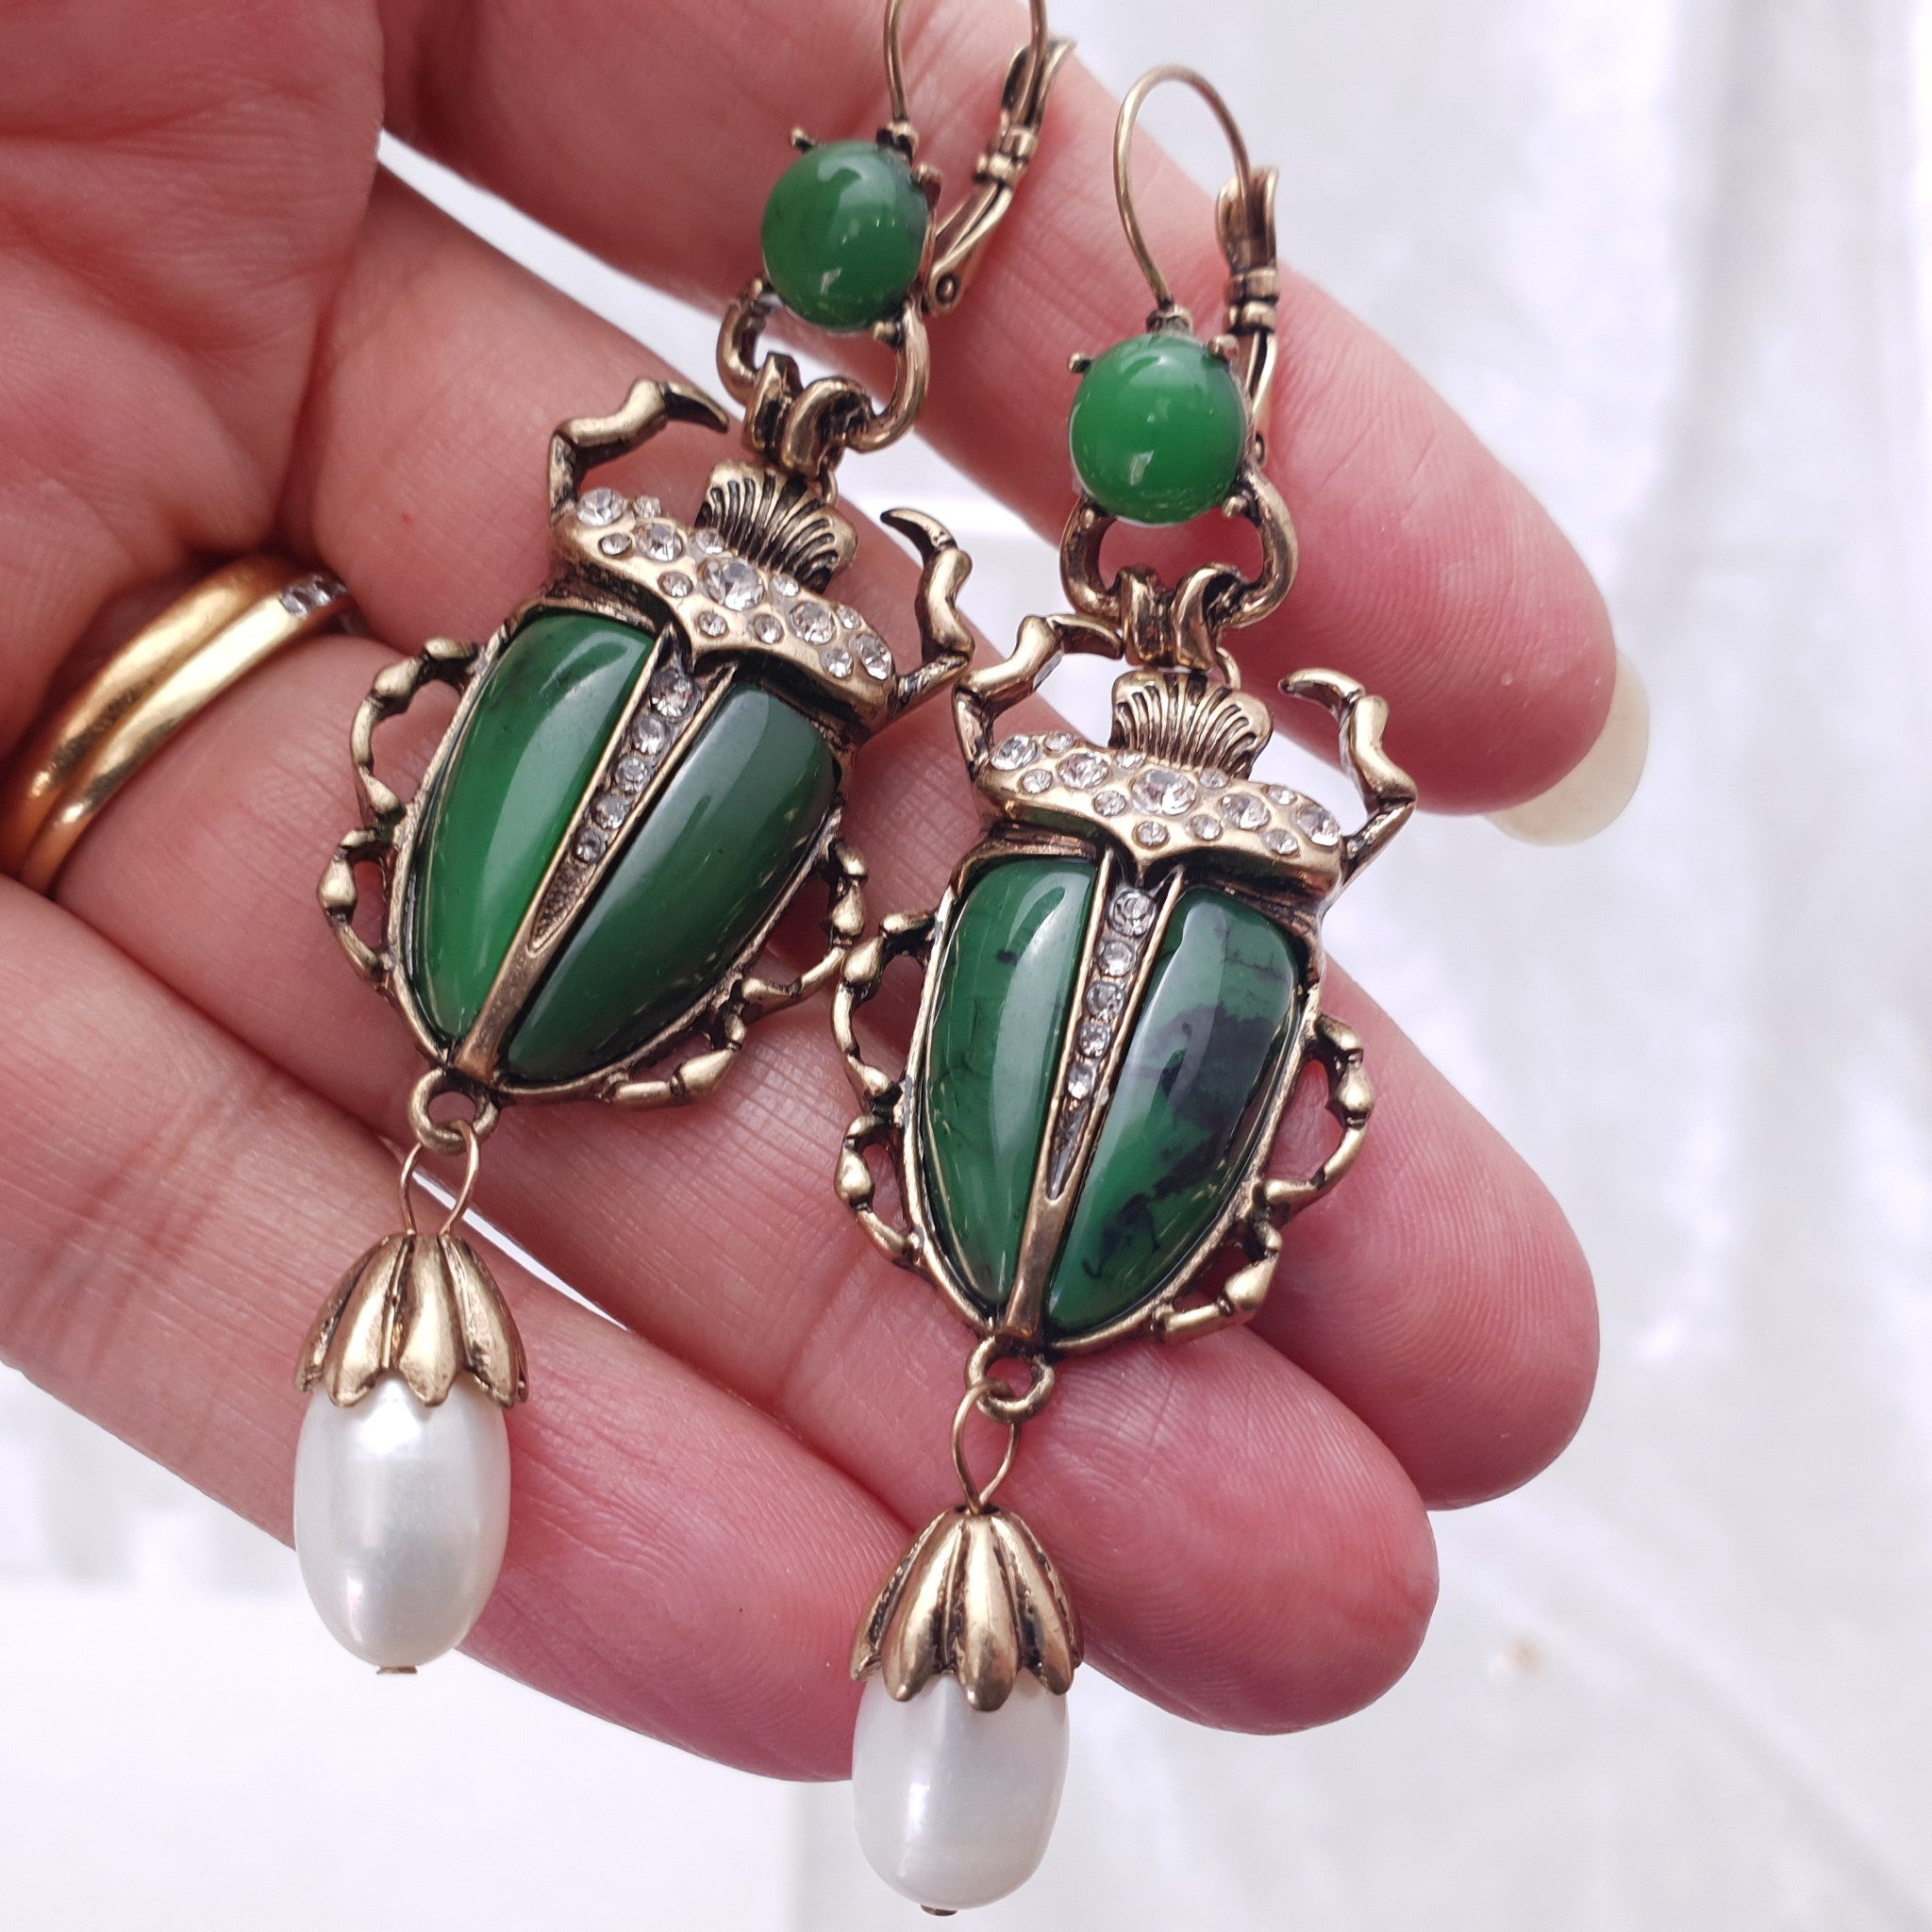 Beetle Dangle Earrings 2 Pairs Beetle Earrings Scarab Beetle Dangle Drop  Earrings Vintage Jewelry for Women Girls Gift  Amazonca Clothing Shoes   Accessories